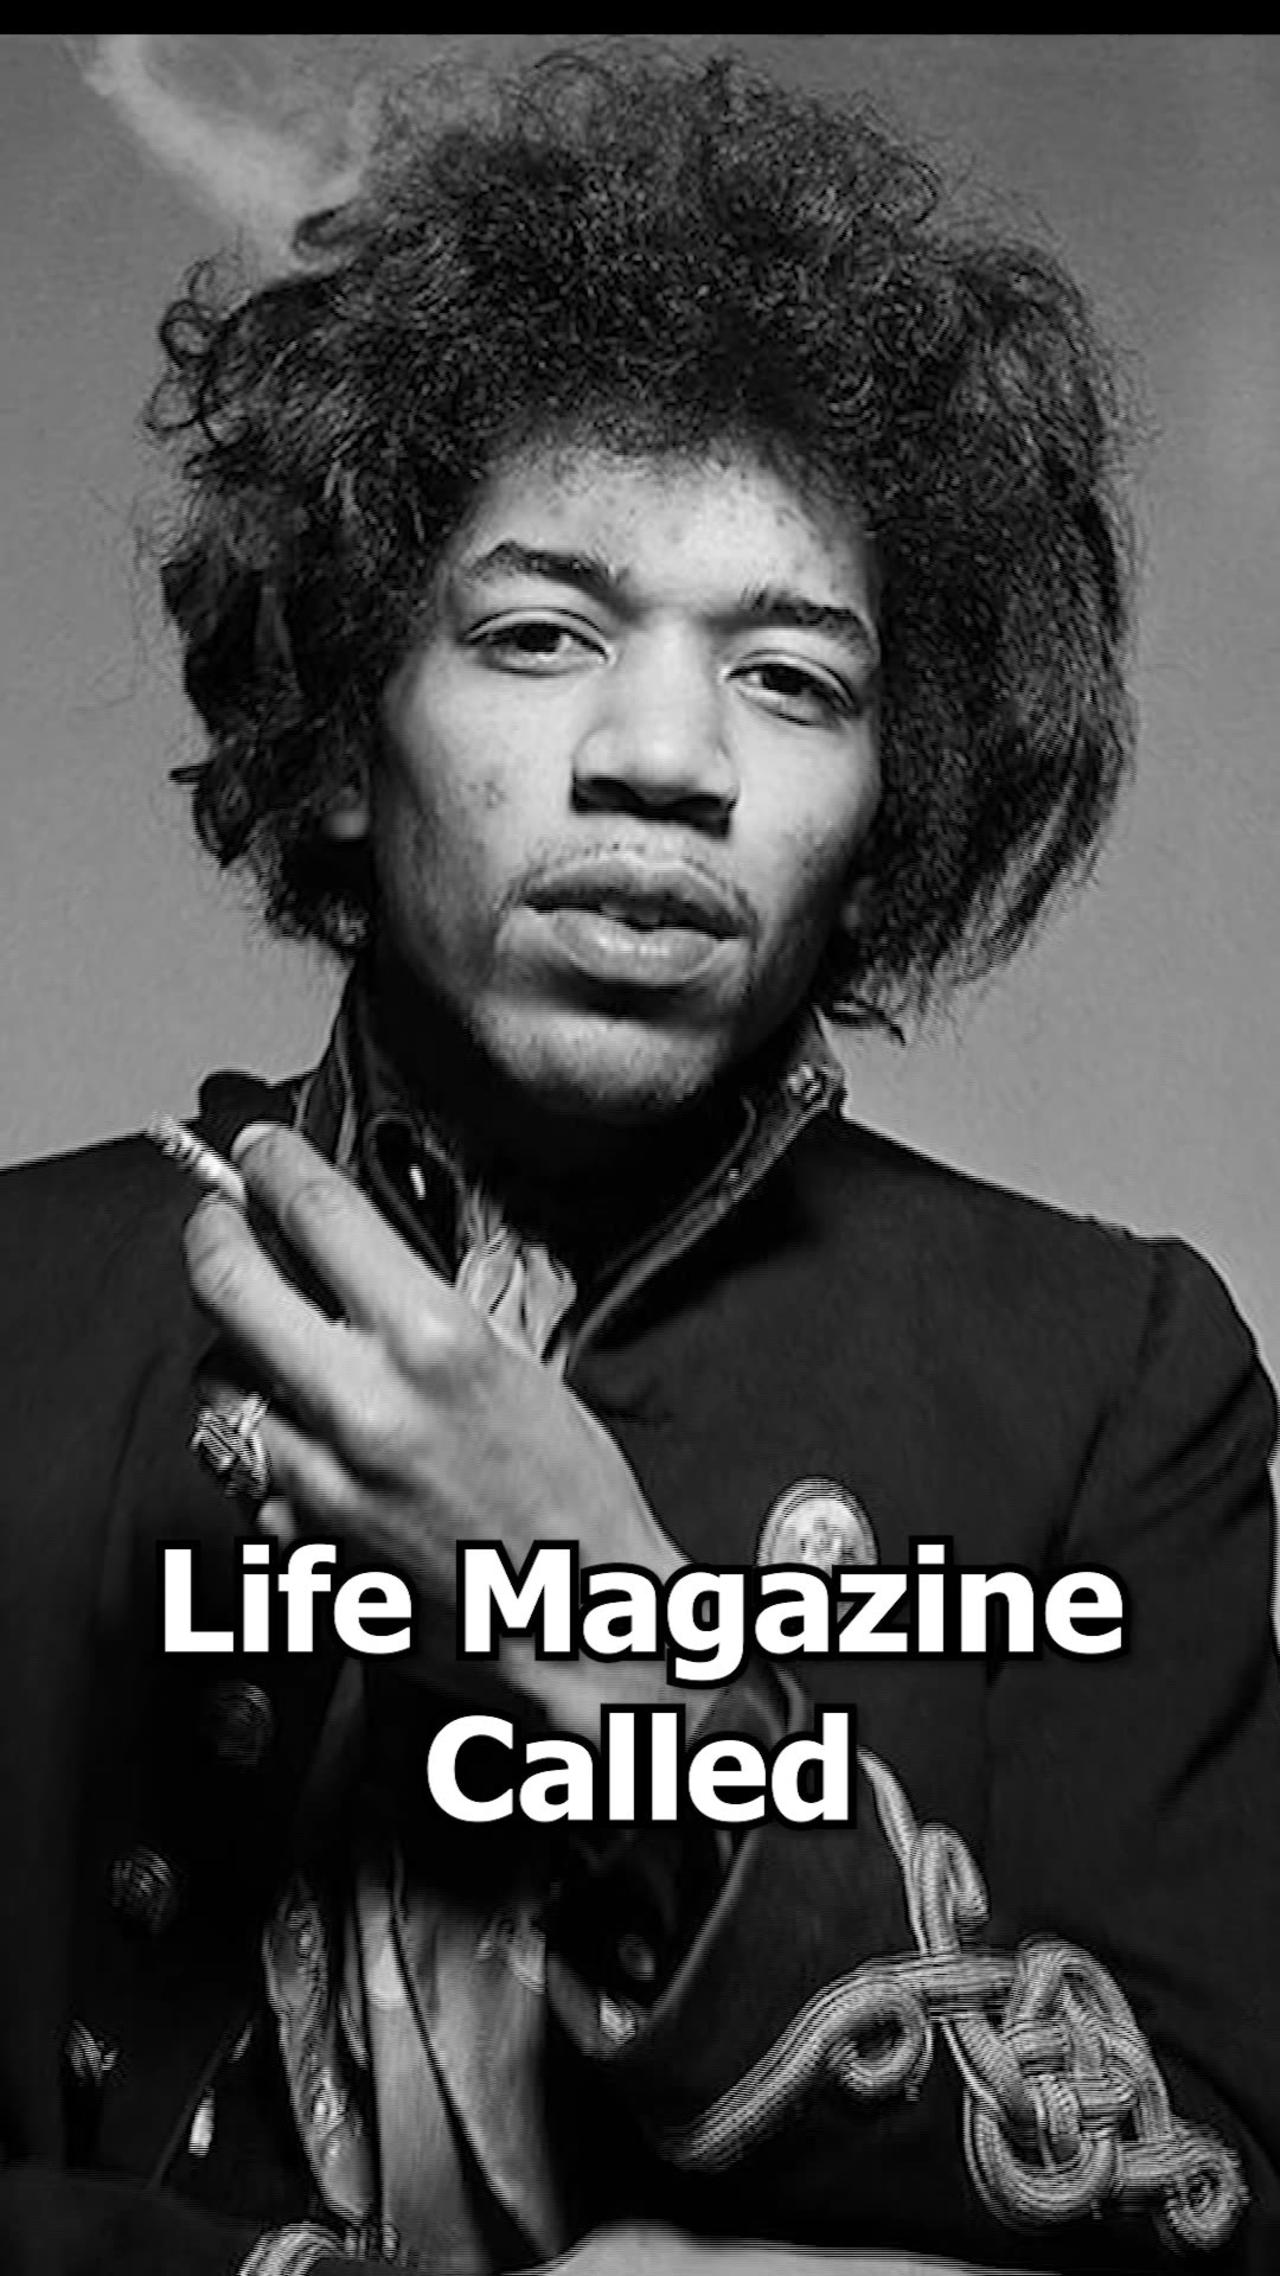 JIMI HENDRIX Was Called This By Life Magazine...